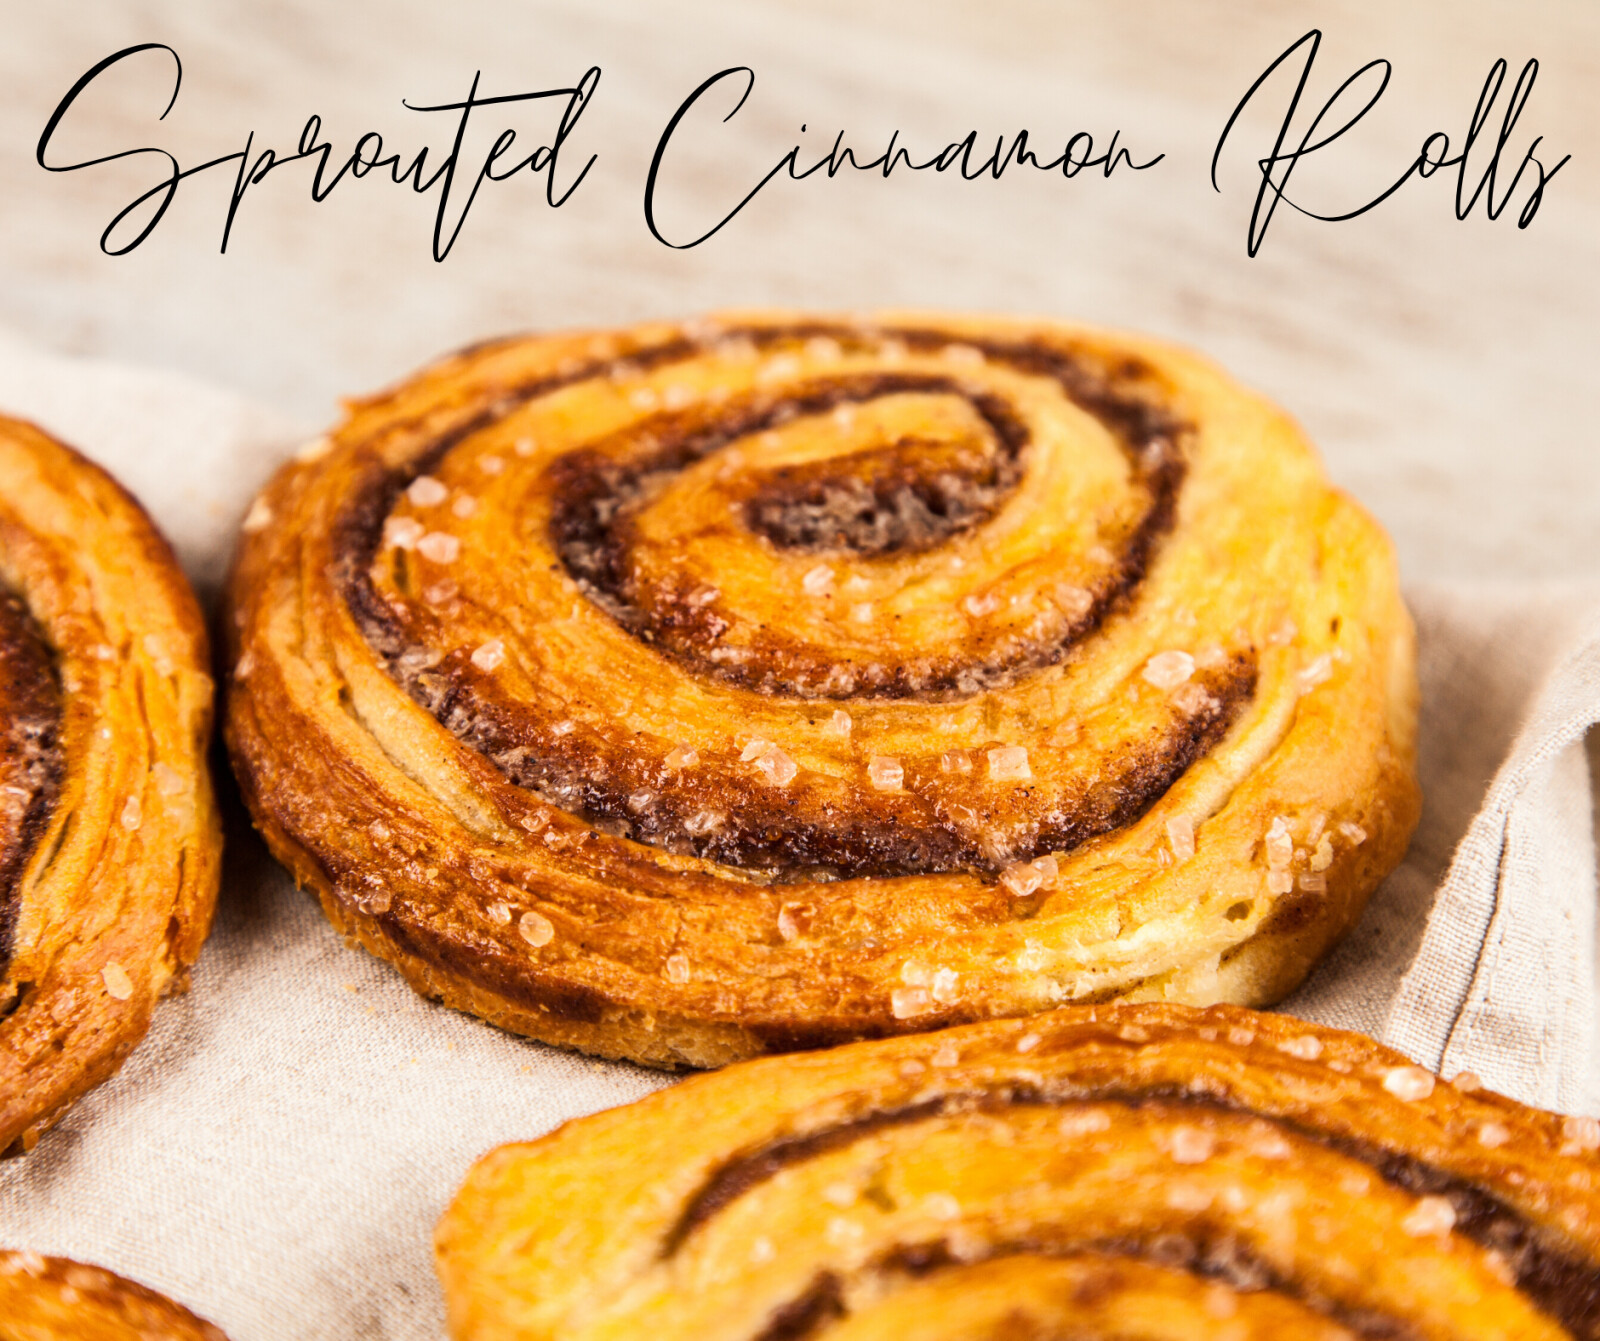 Sprouted Cinnamon Rolls